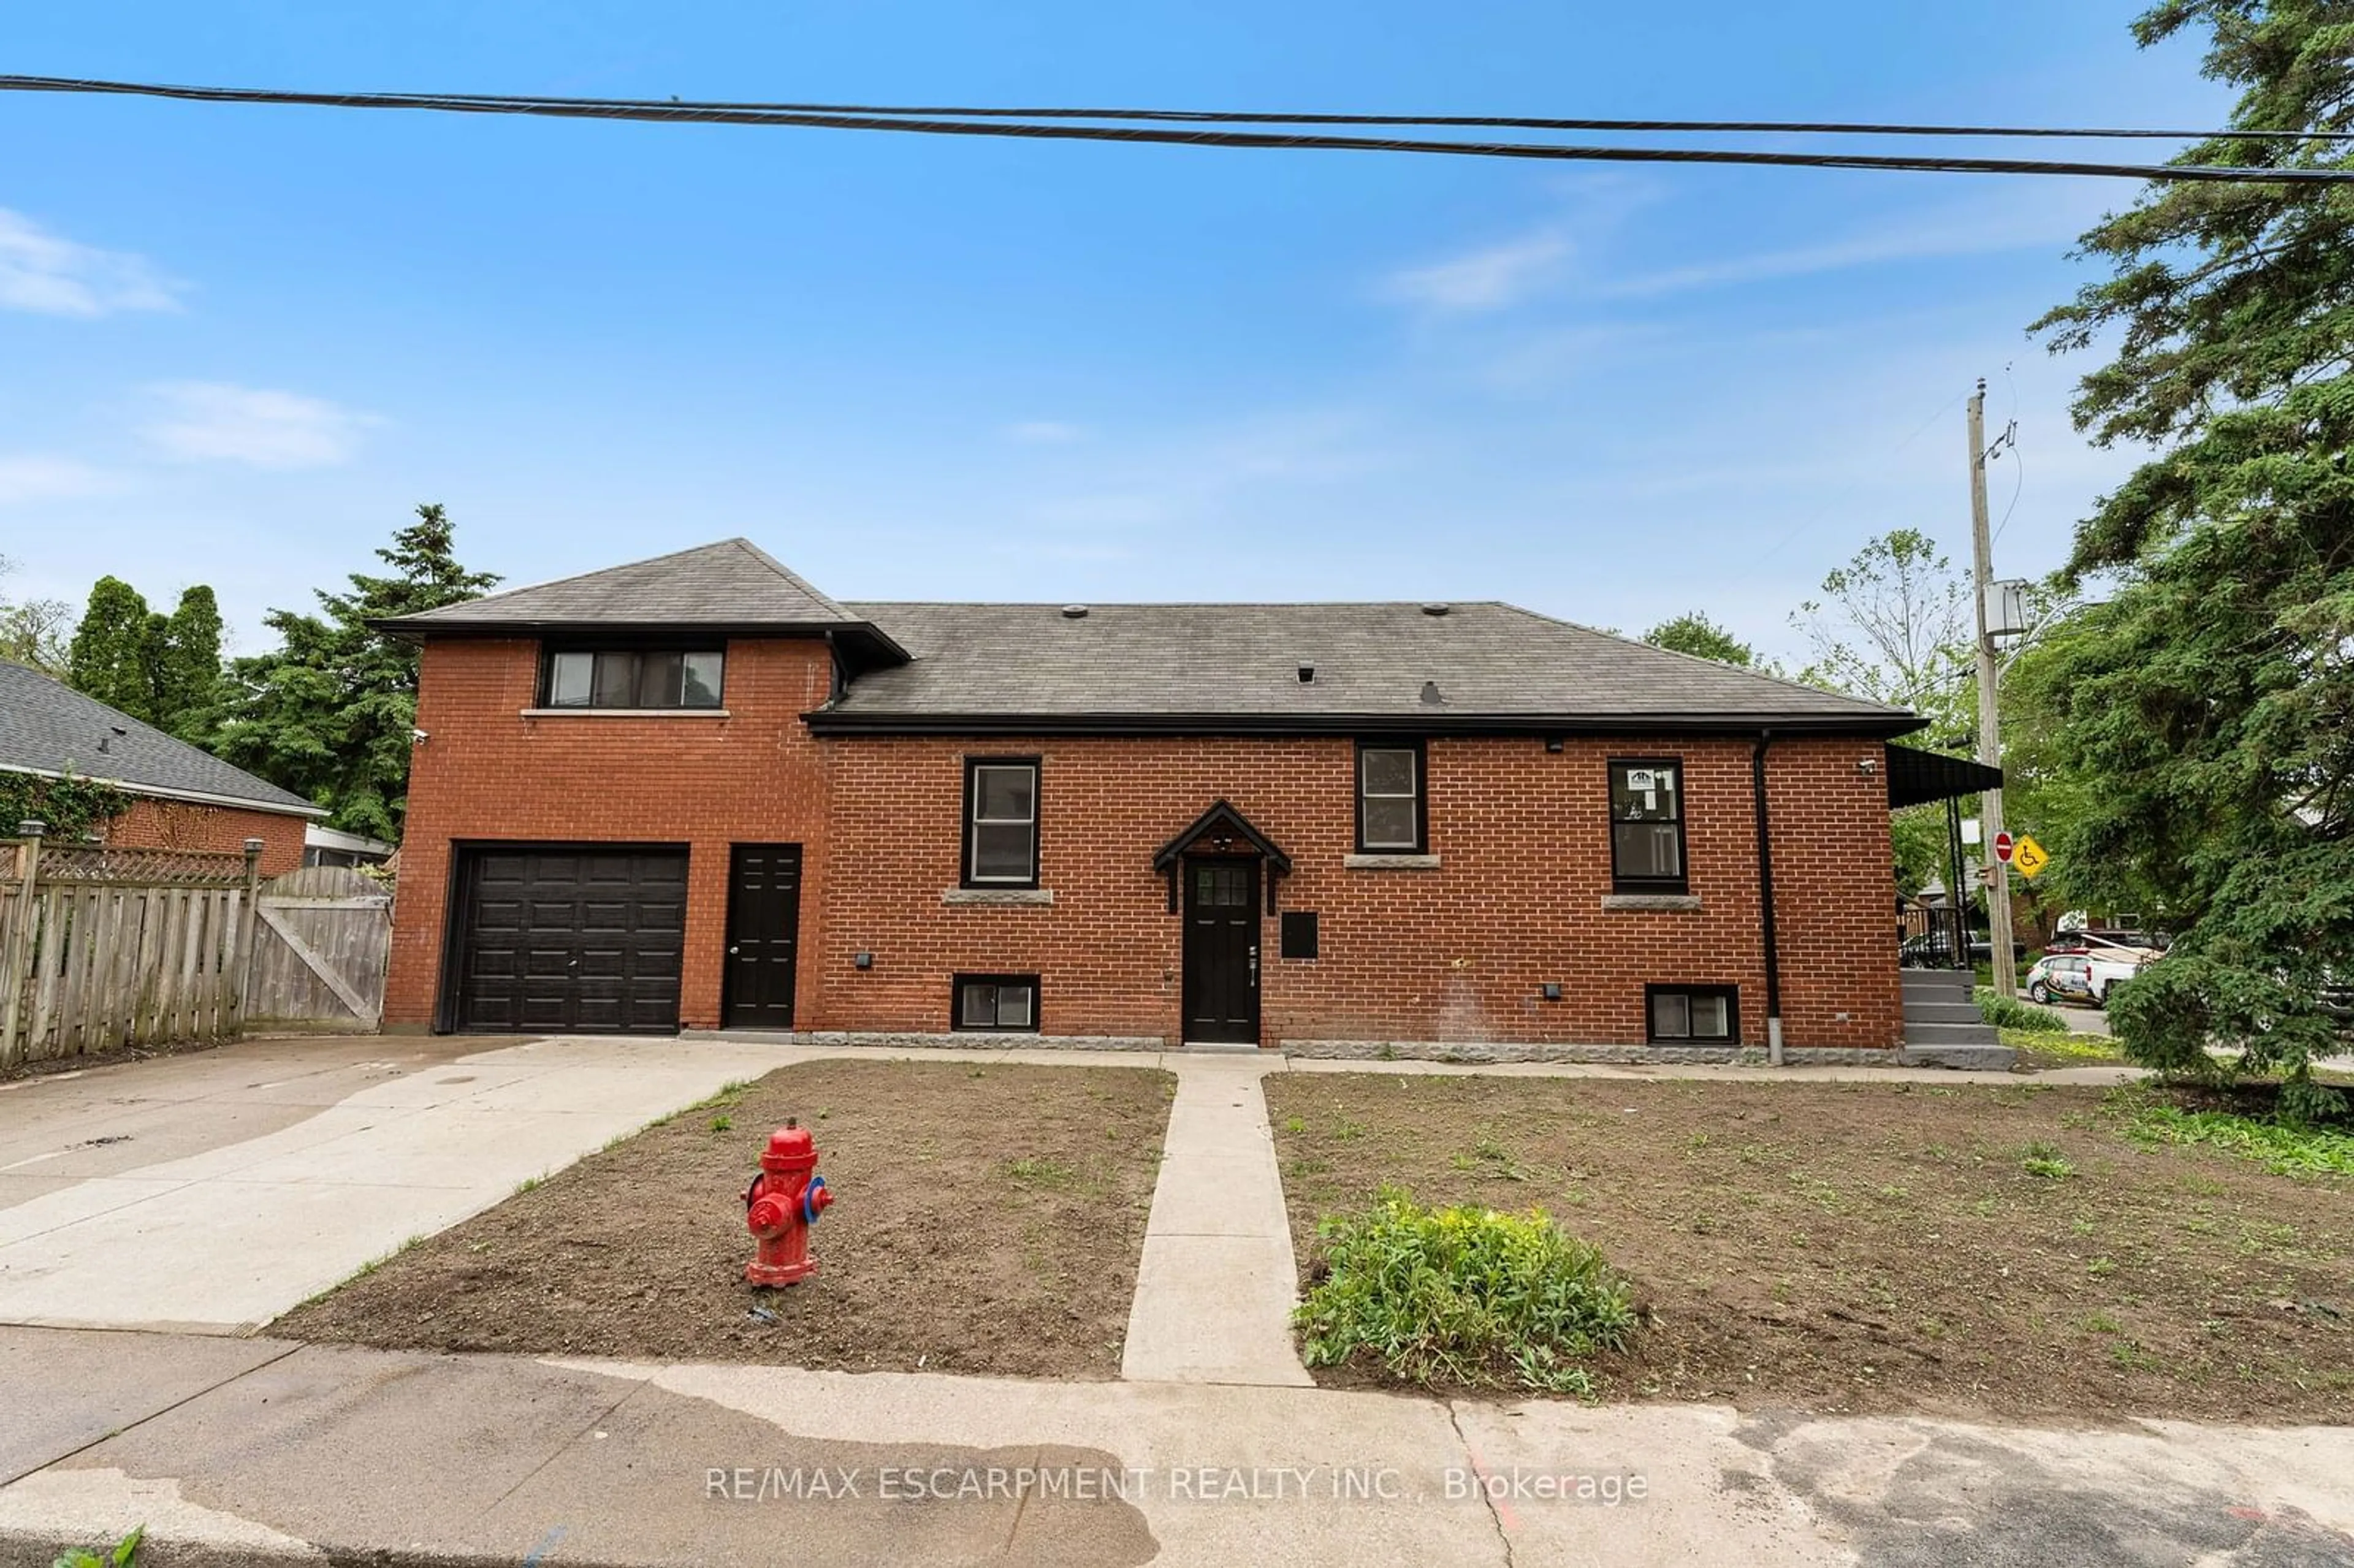 Home with brick exterior material for 47 MacDonald Ave, Hamilton Ontario L8P 4N8